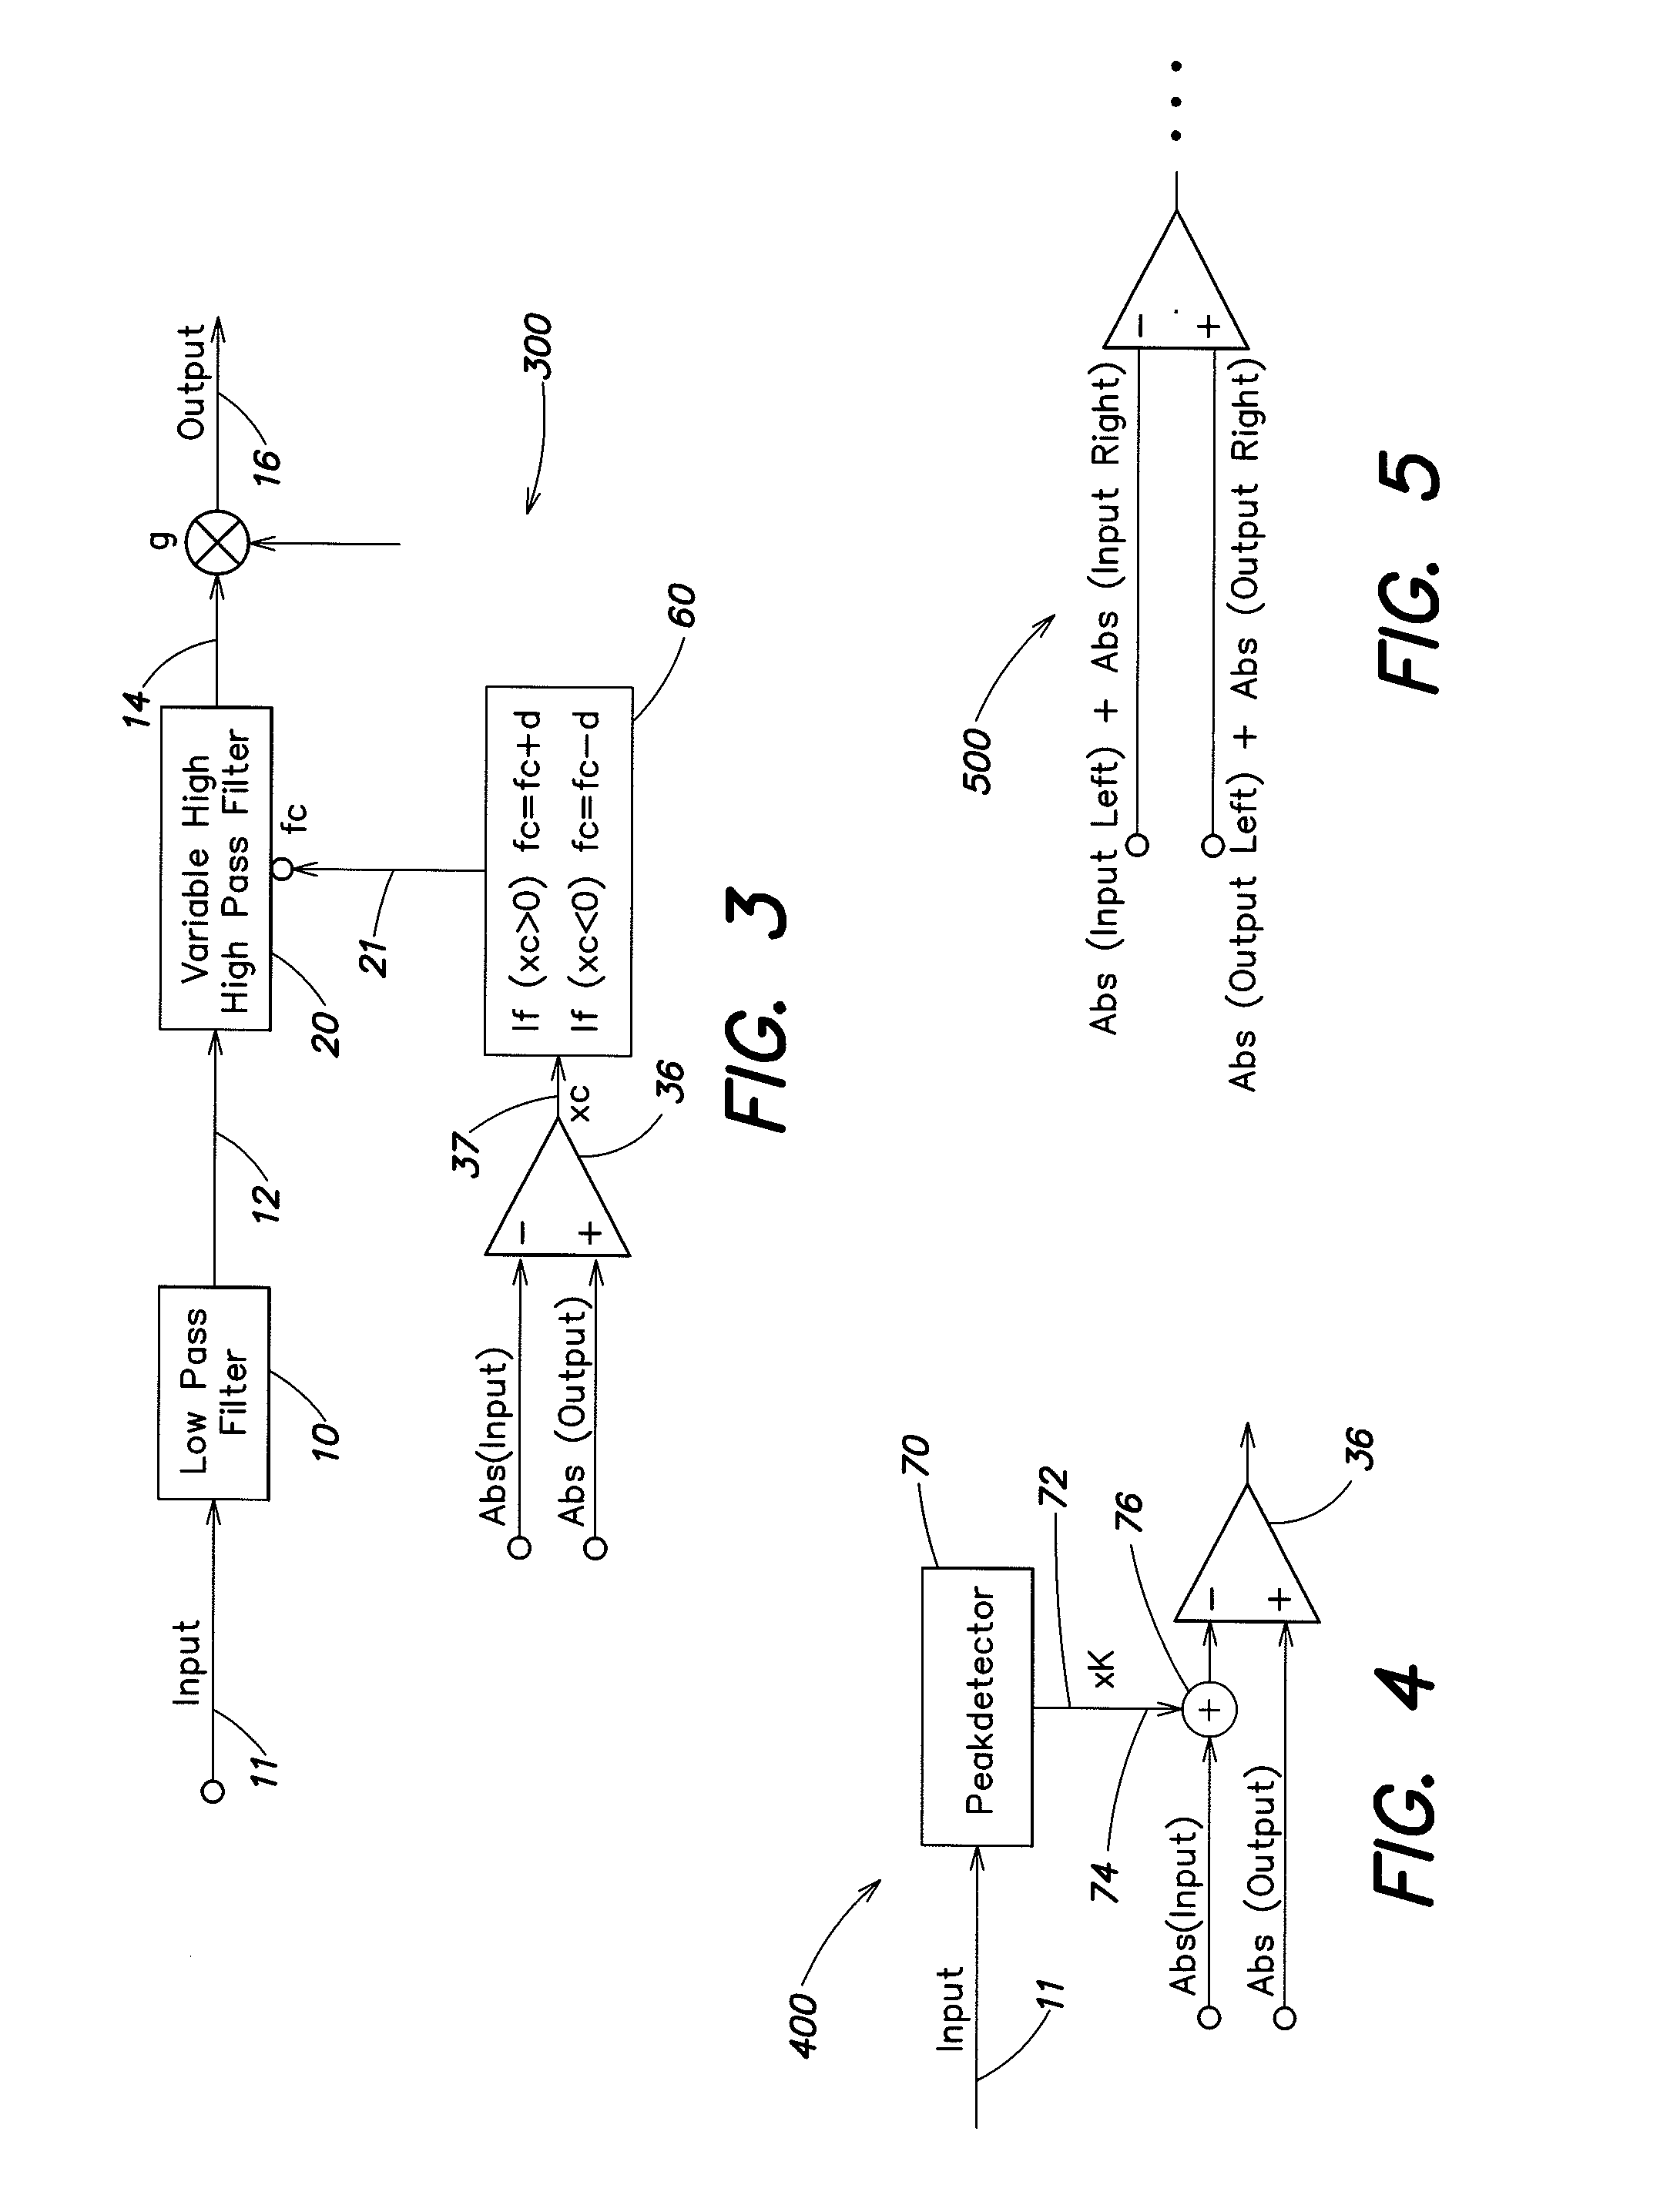 Circuit for improving the intelligibility of audio signals containing speech